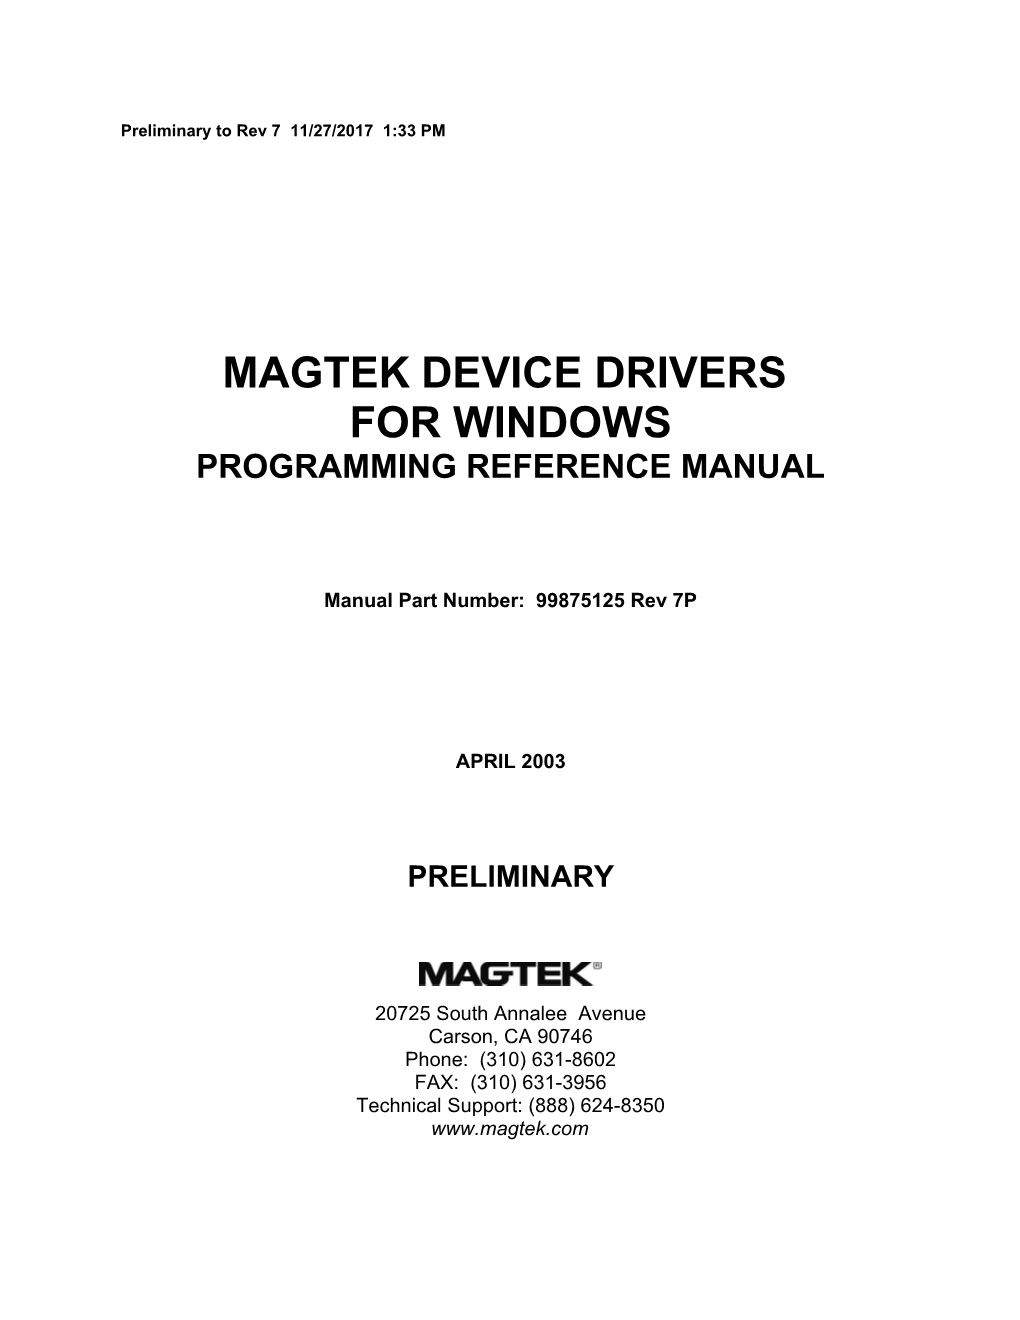 Magtek Device Drivers For Windows, Programming Reference Manual